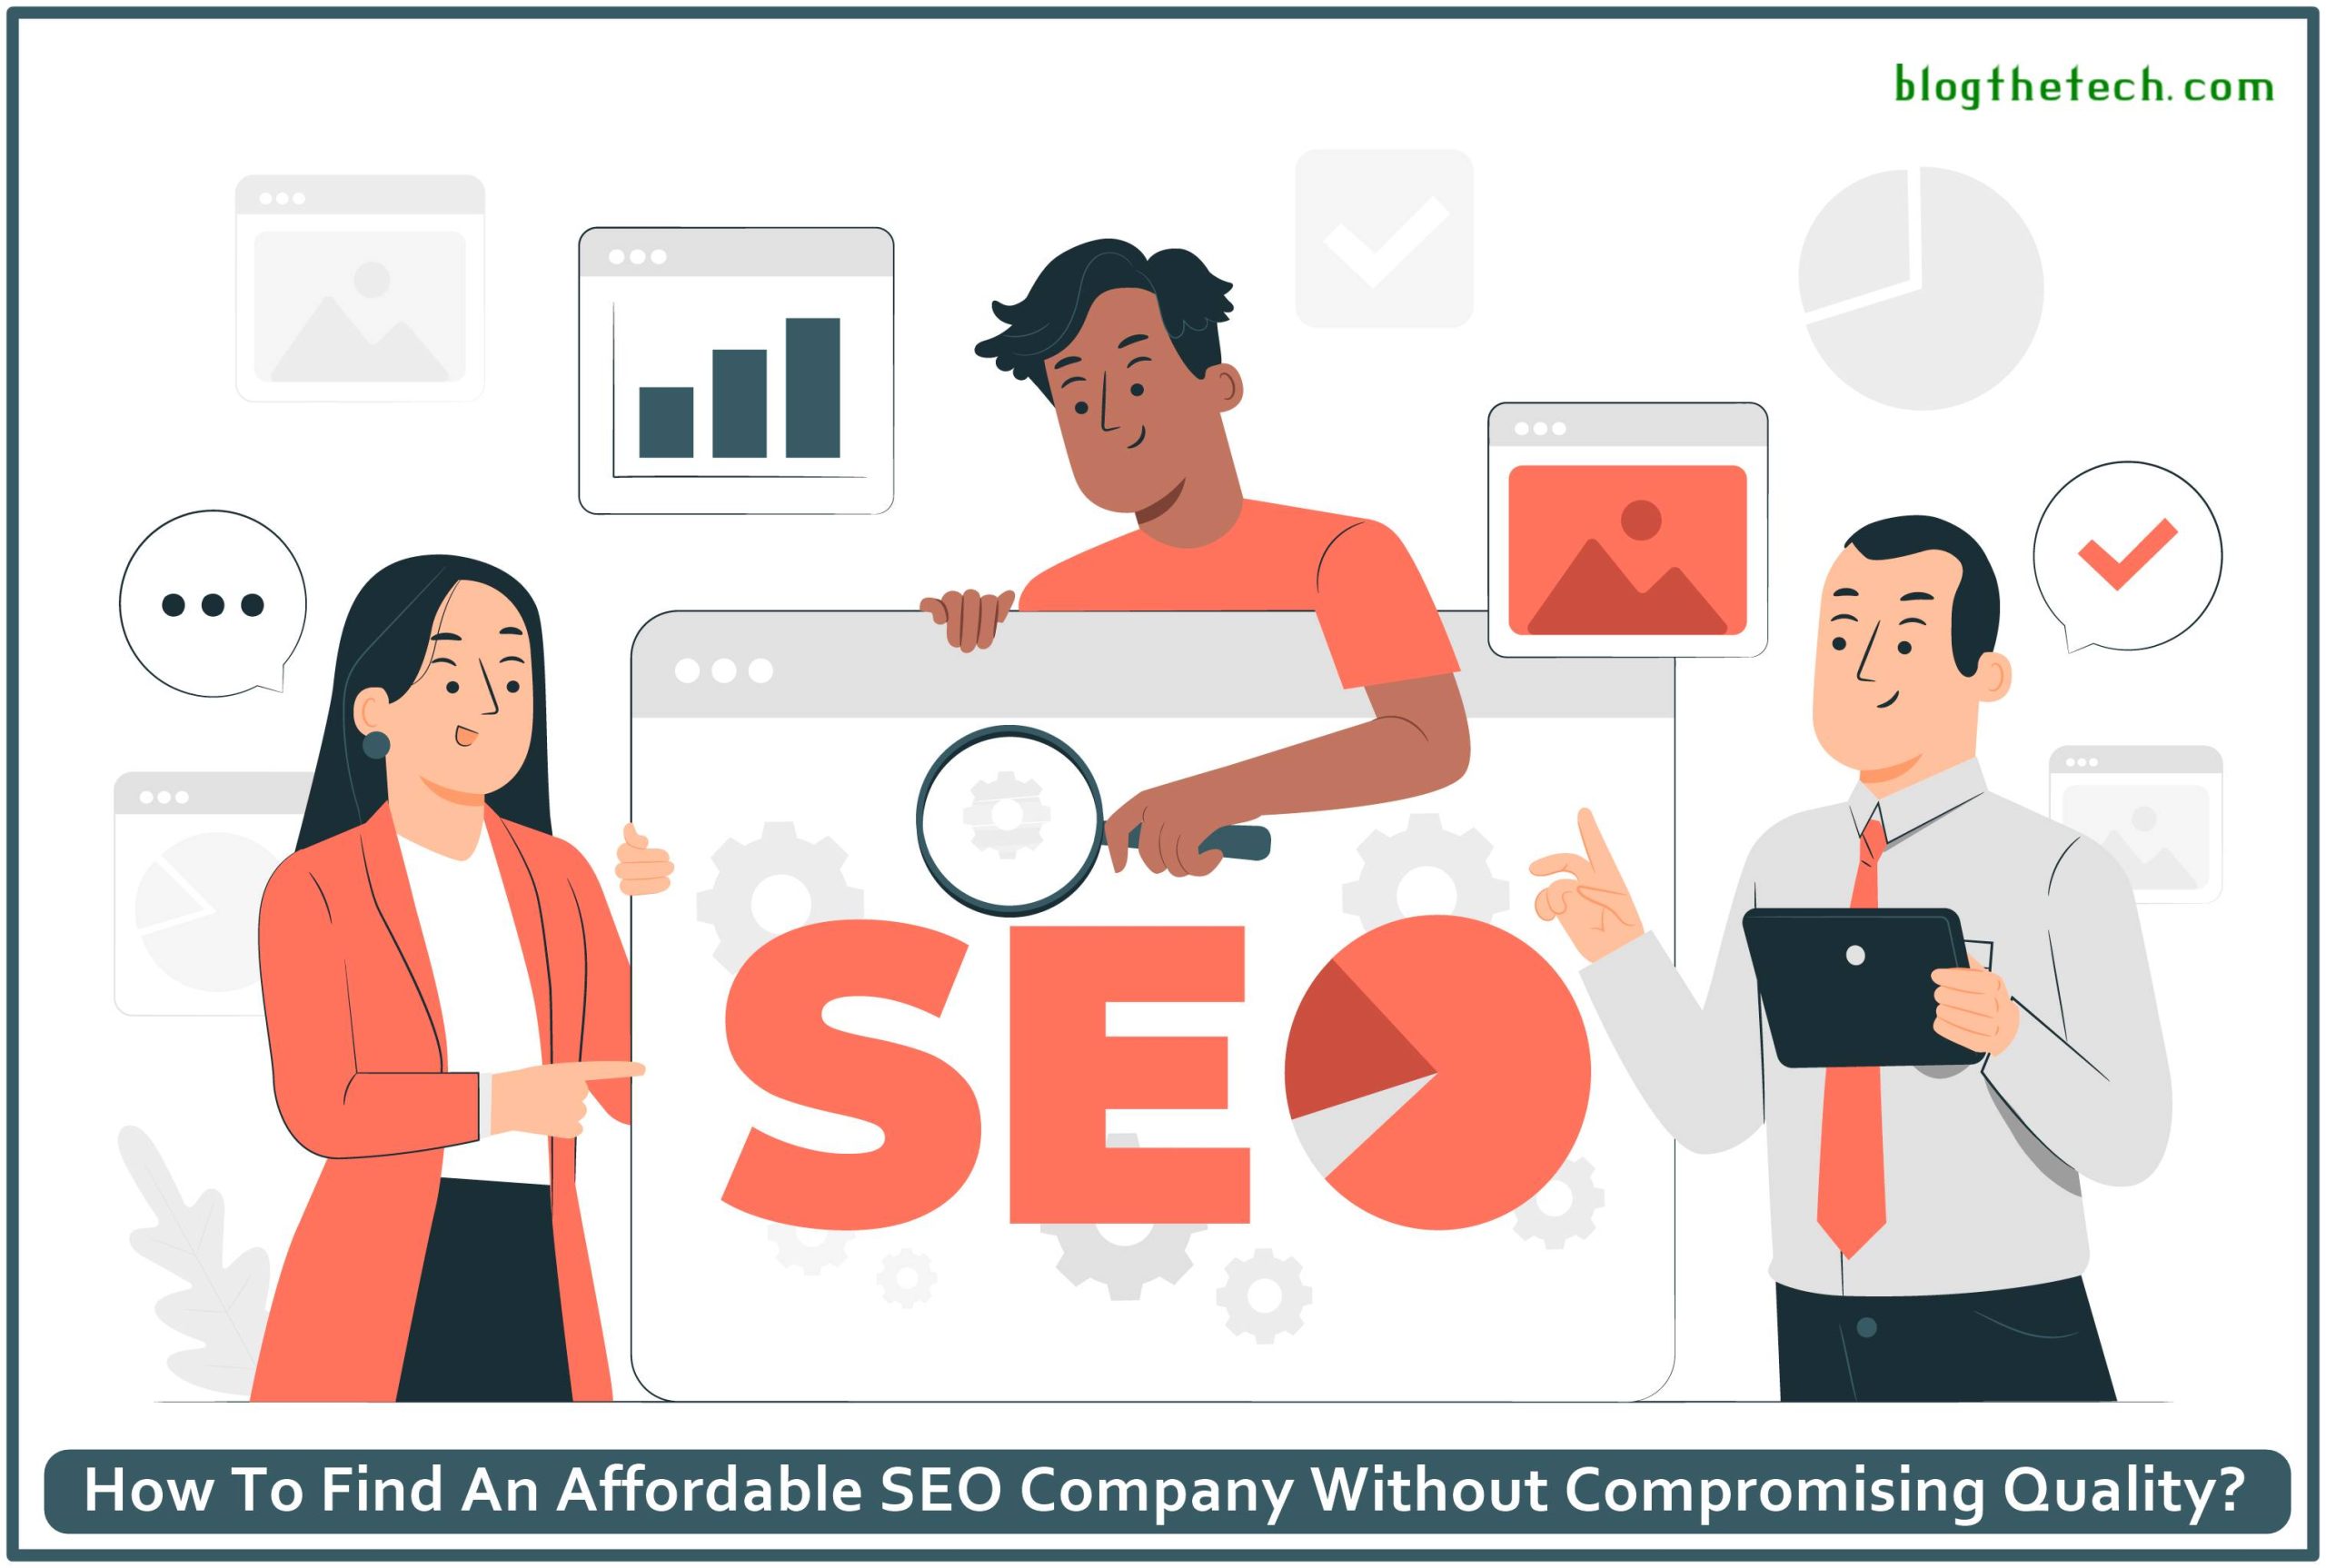 How To Find An Affordable SEO Company Without Compromising Quality?